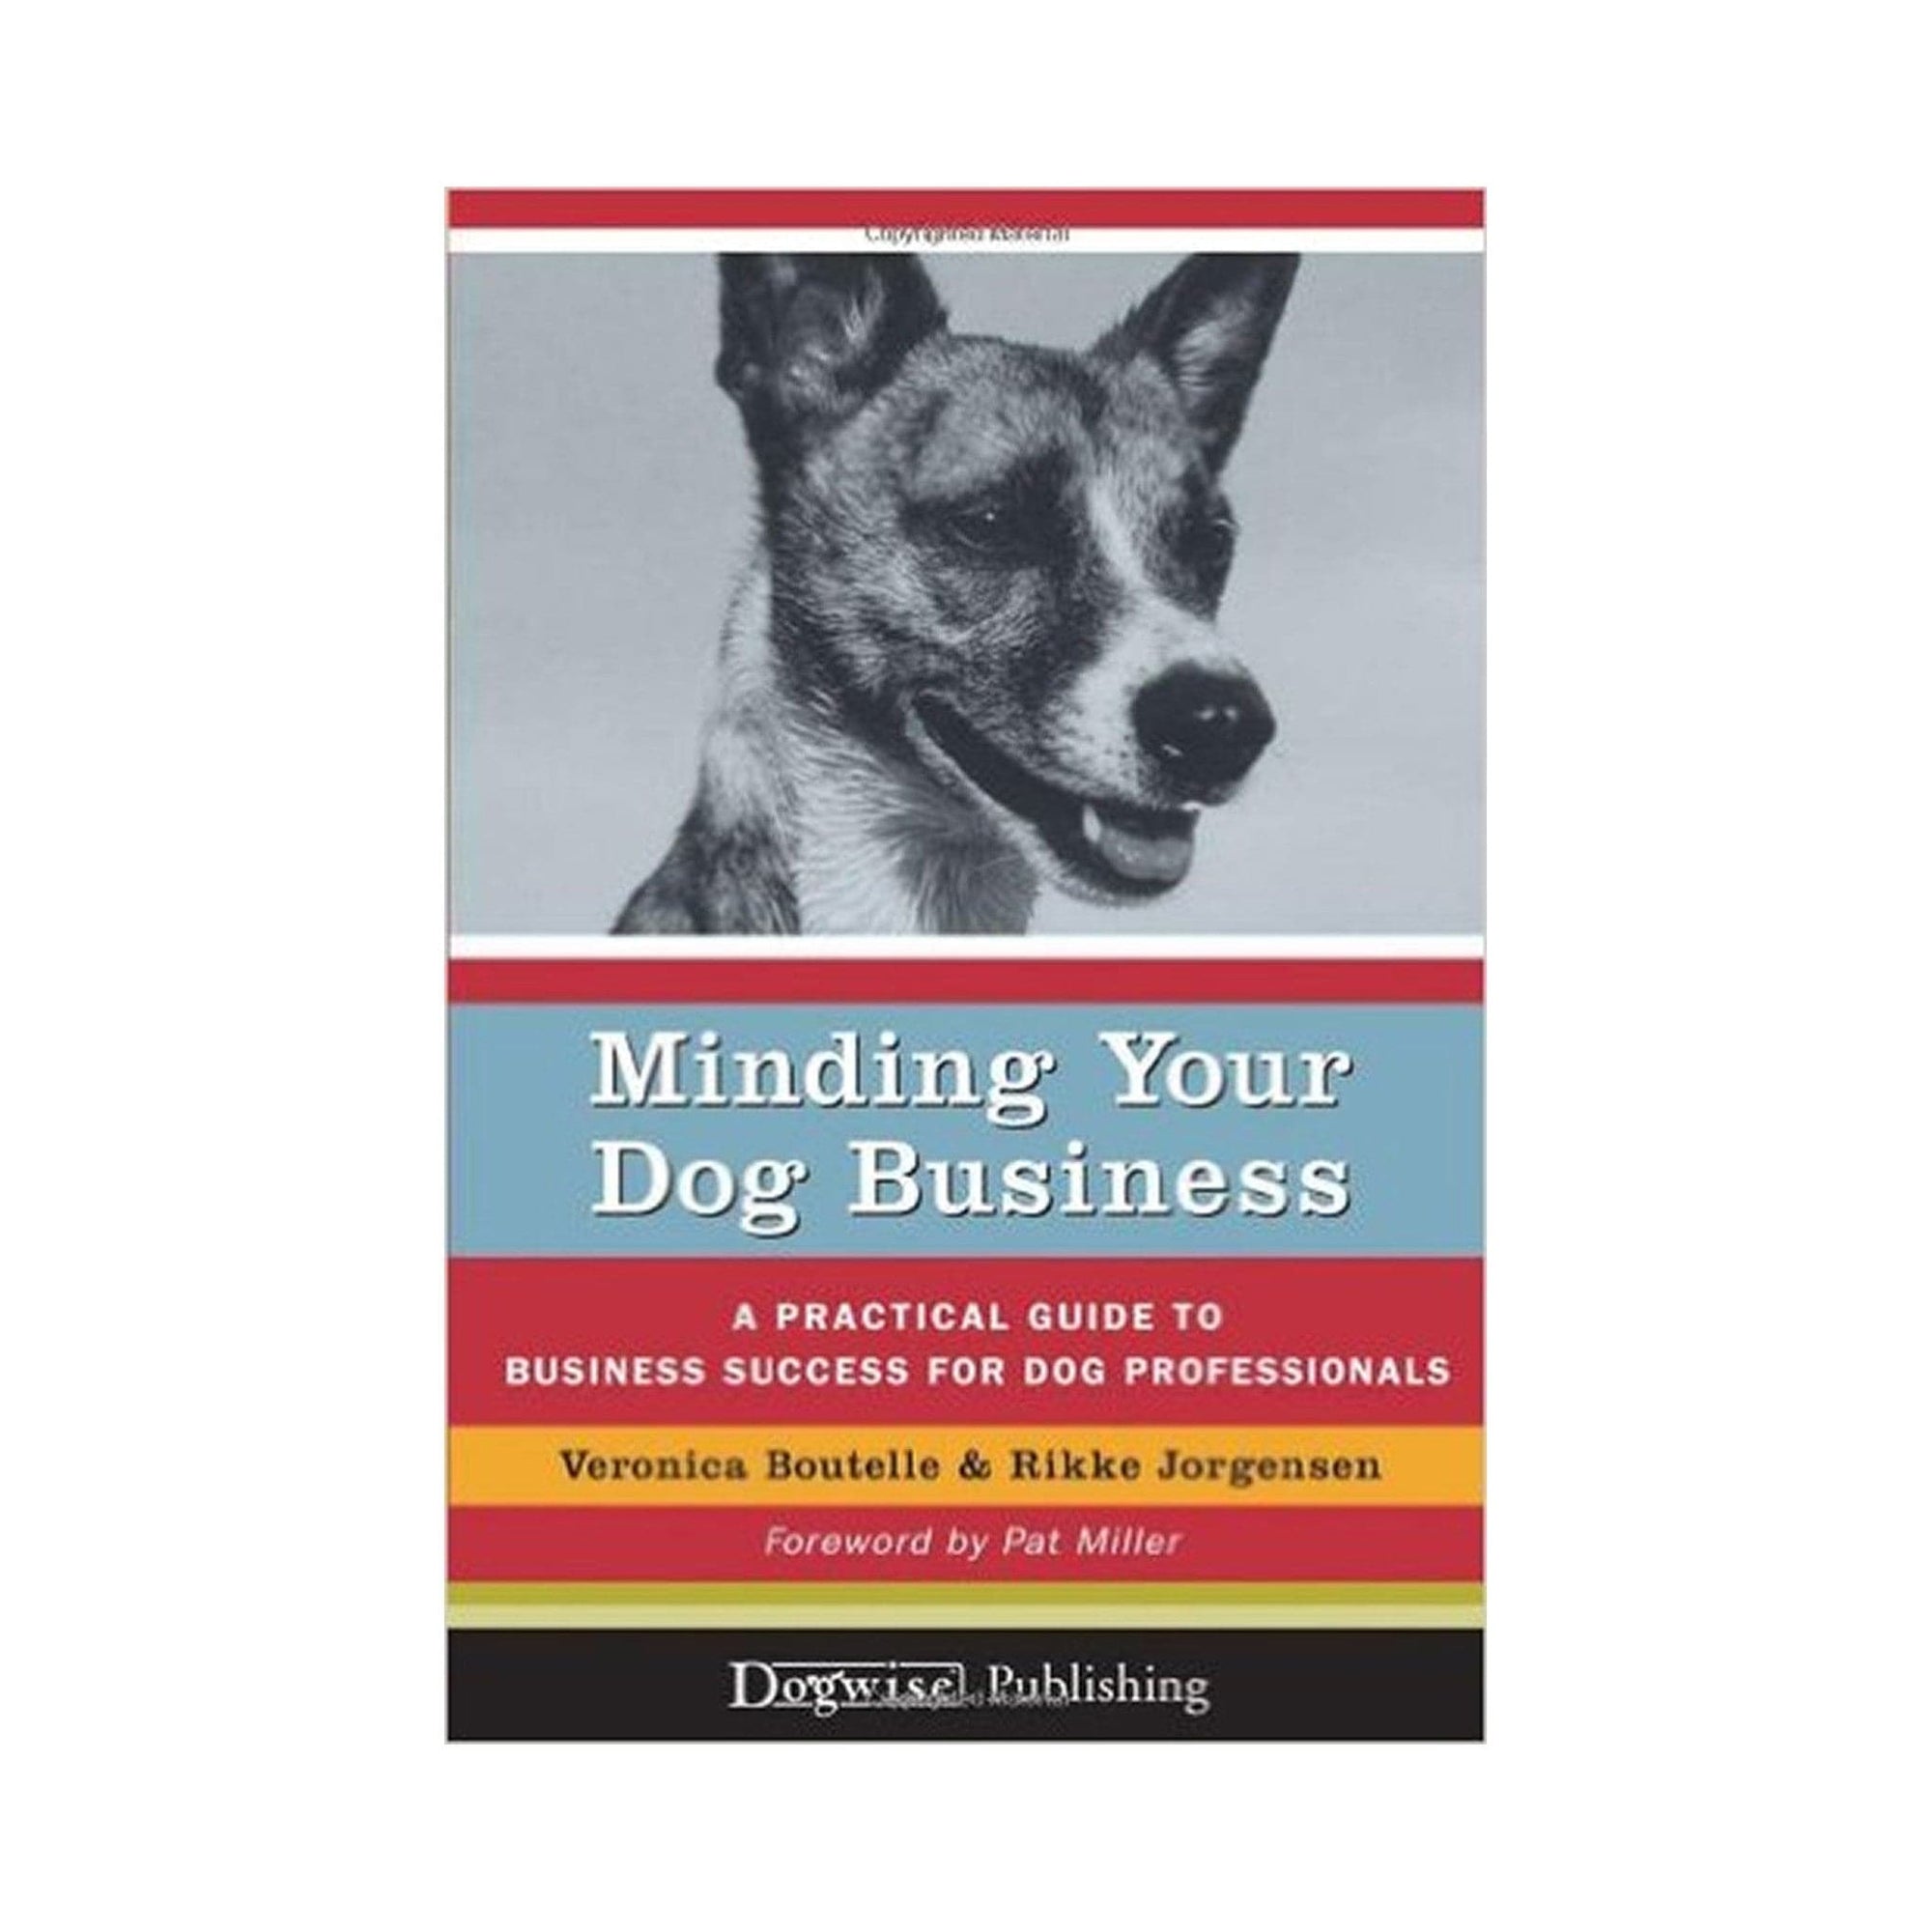 E-BOOK Minding Your Dog Business by Veronica Boutelle and Rikke Jorgensen